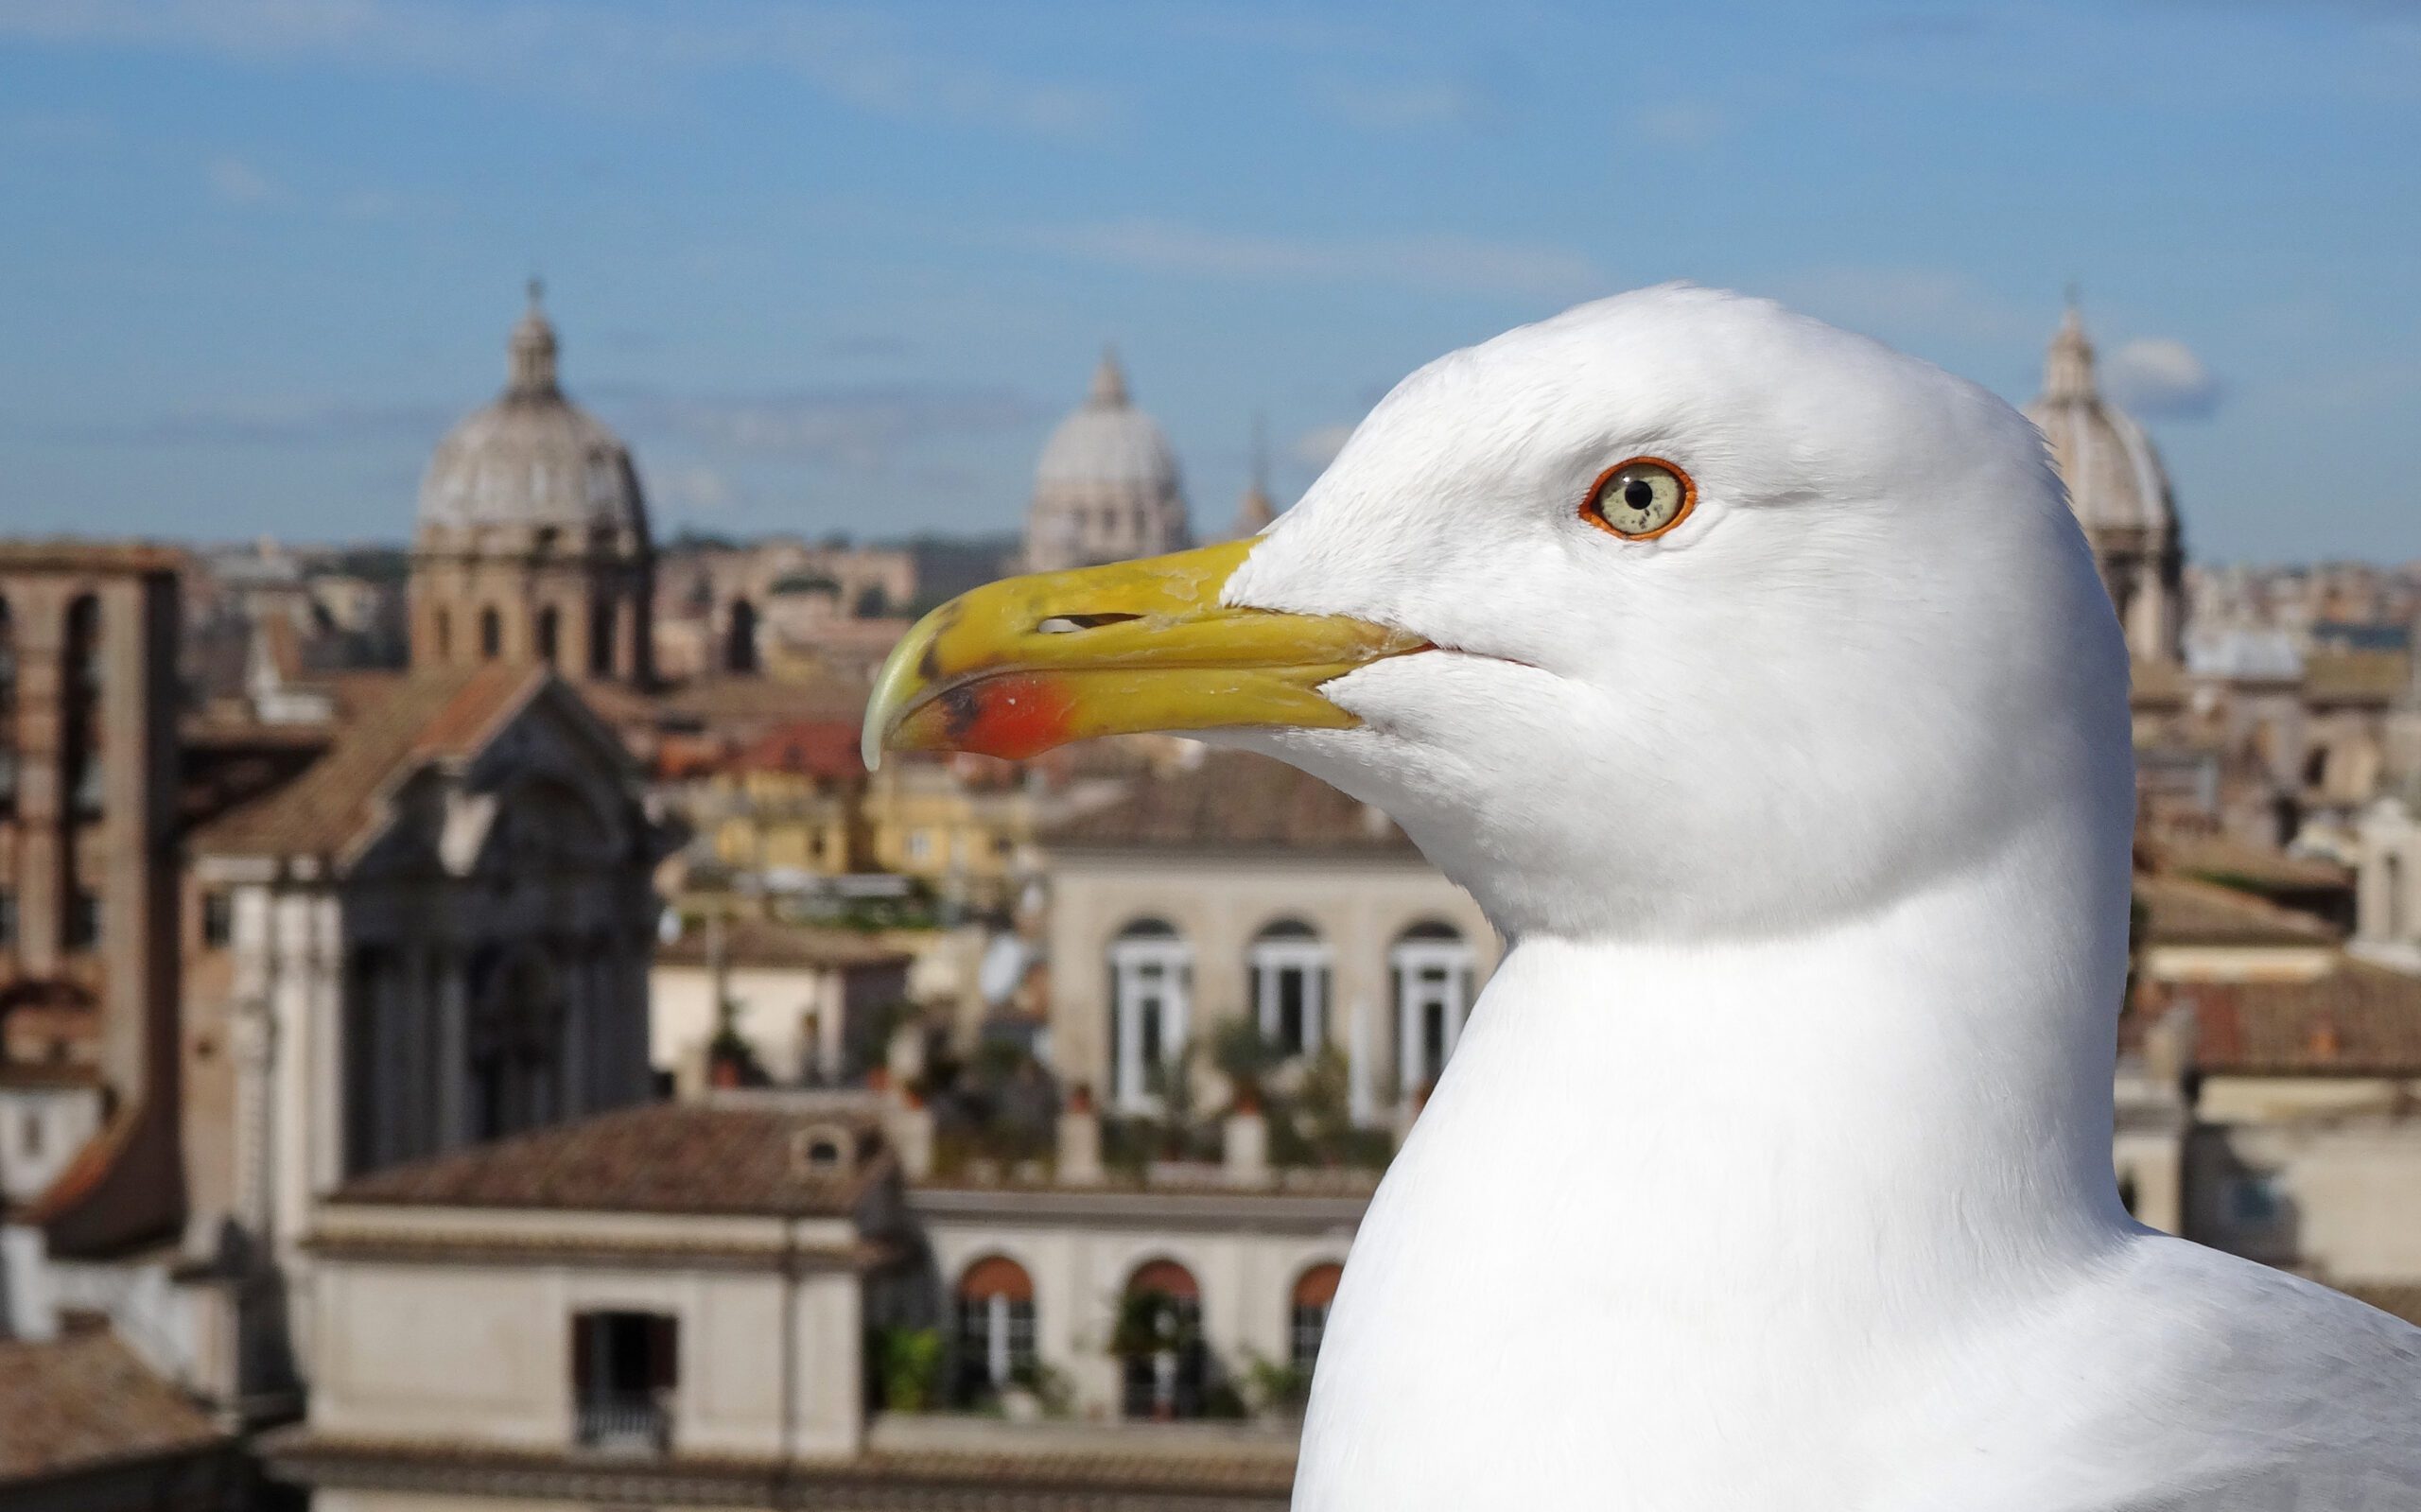 The head of a white bird with a yellow bill with an ancient urban background.